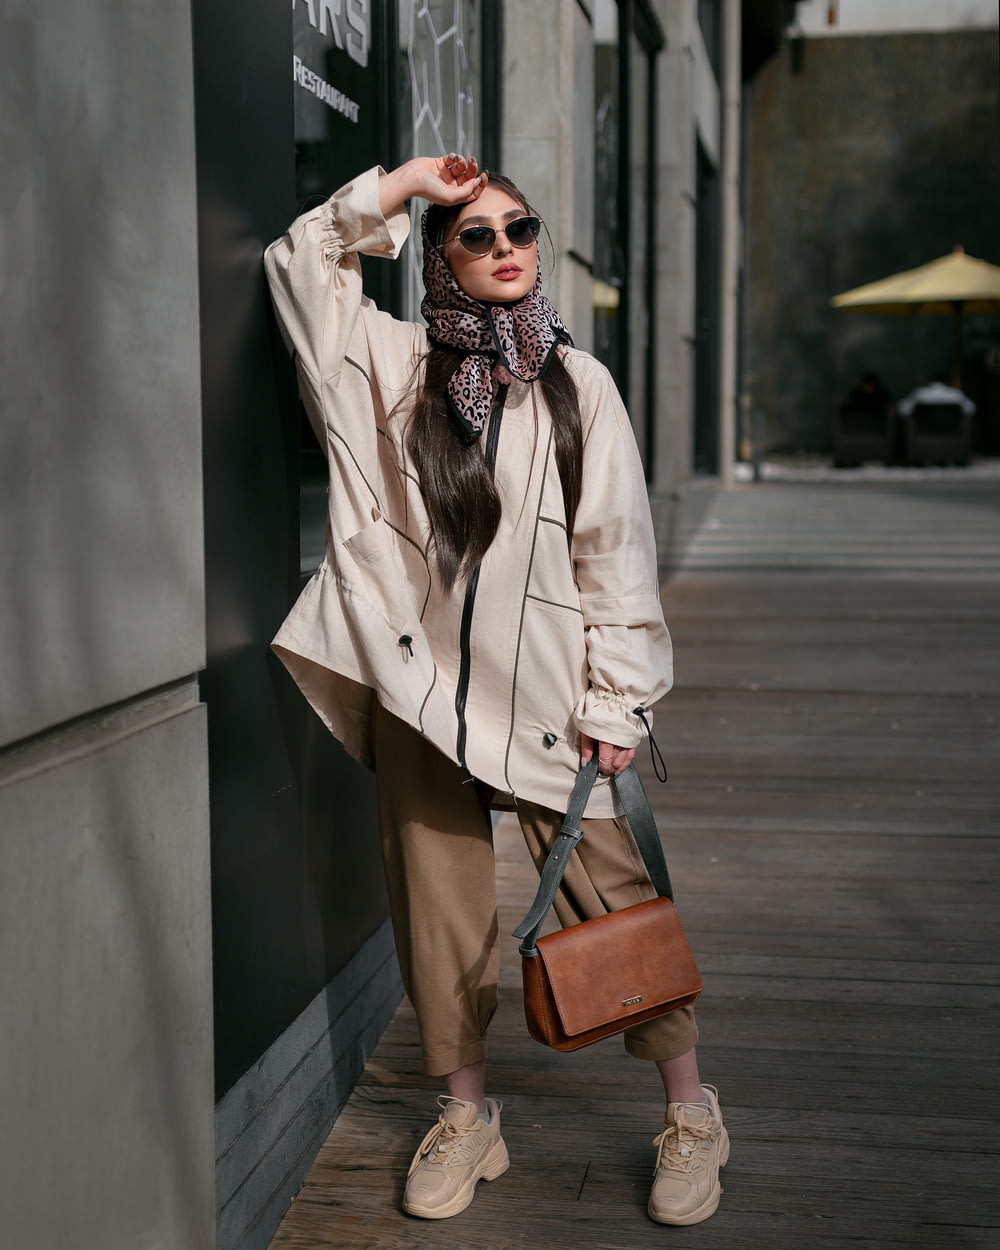 a woman wearing a coat and sunglasses